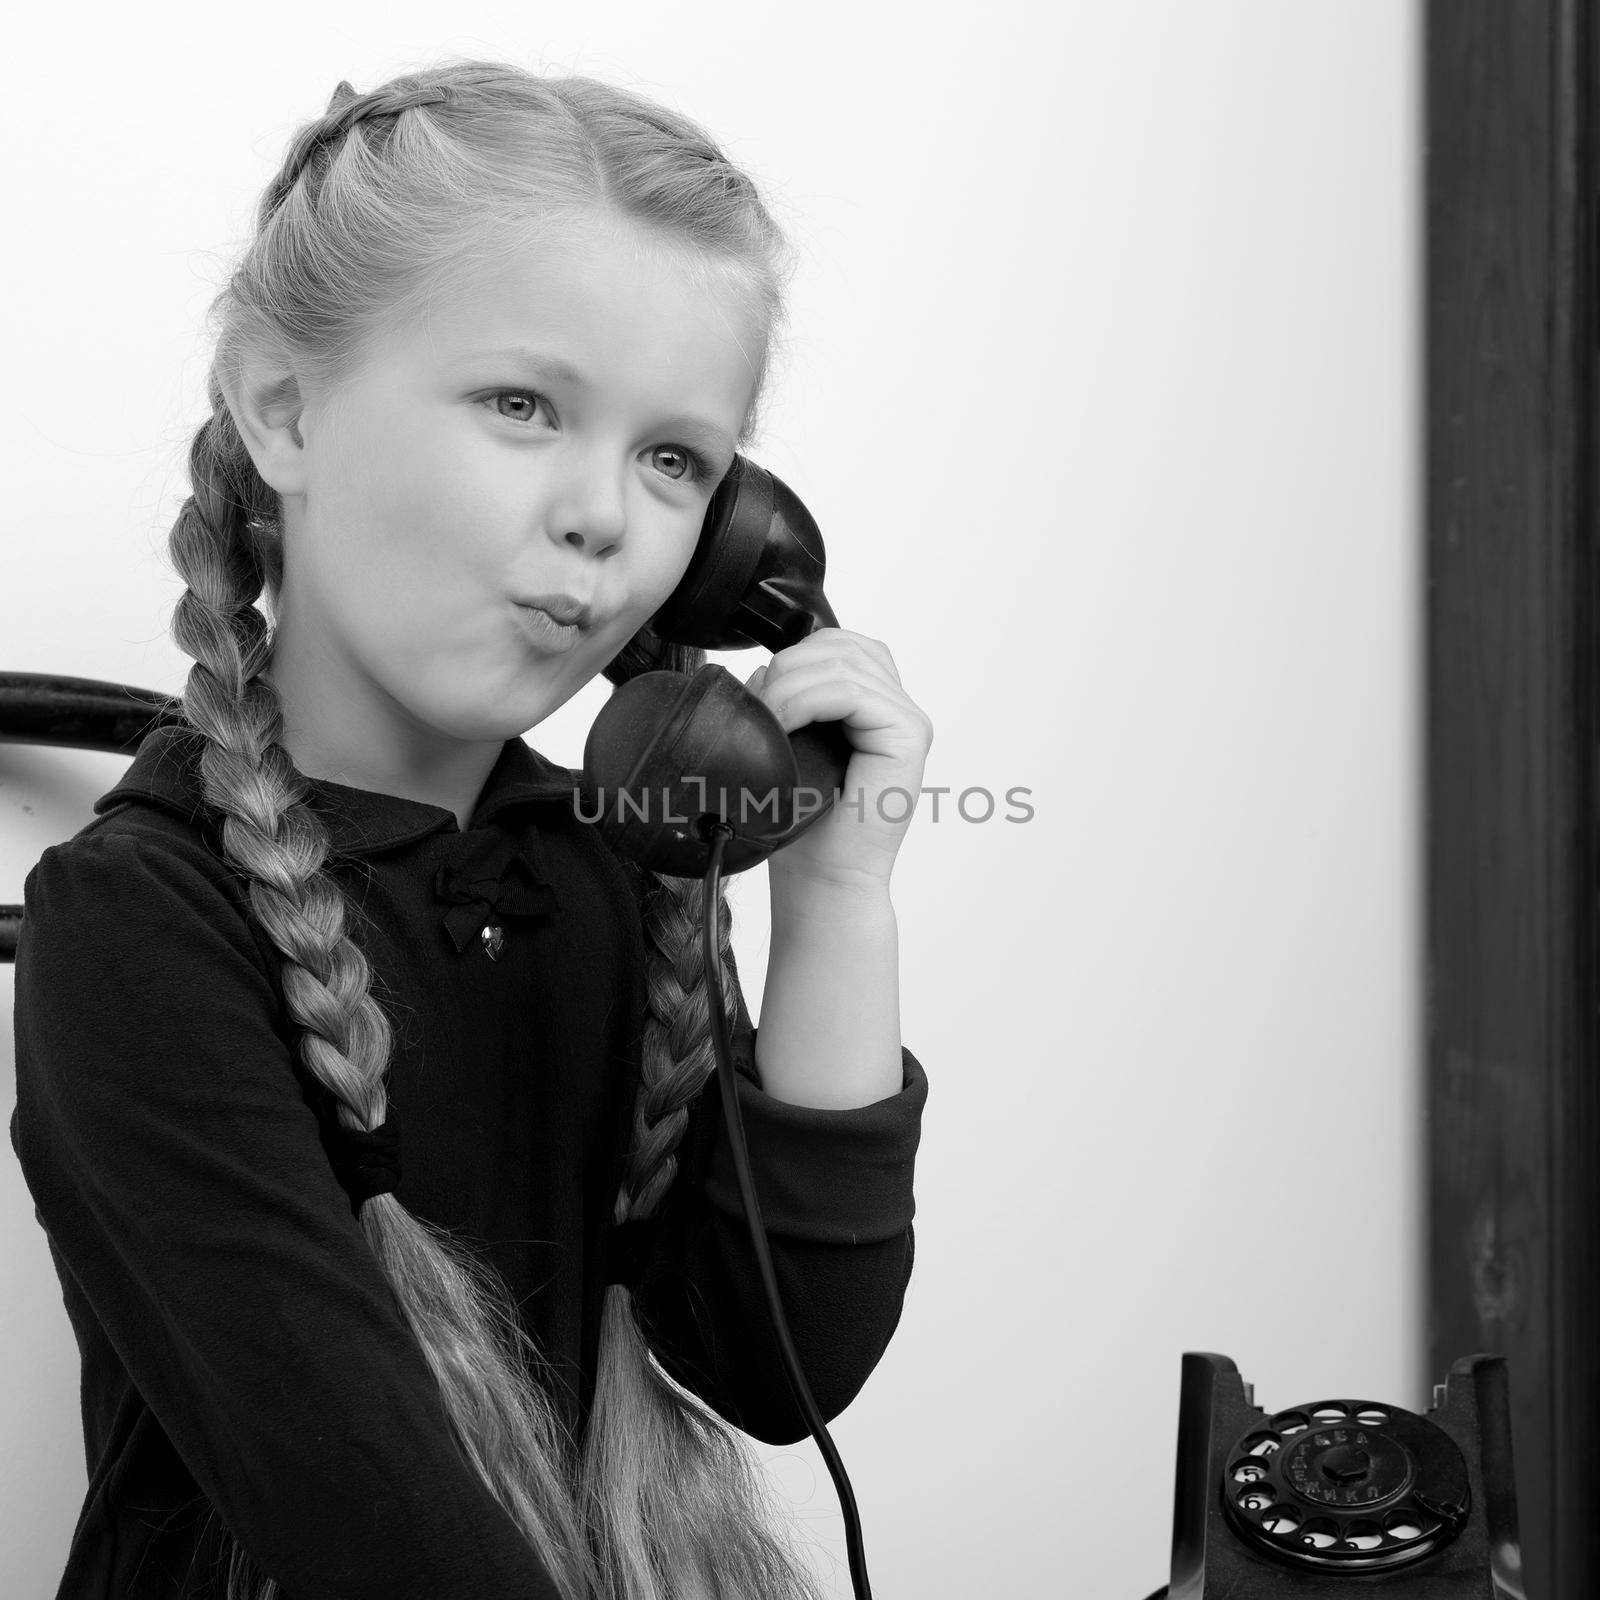 Smiling girl talking by old phone. Black and white shot of lovely kid sitting on chair in vintage room interior. Cute six years old kid speaking on vintage telephone